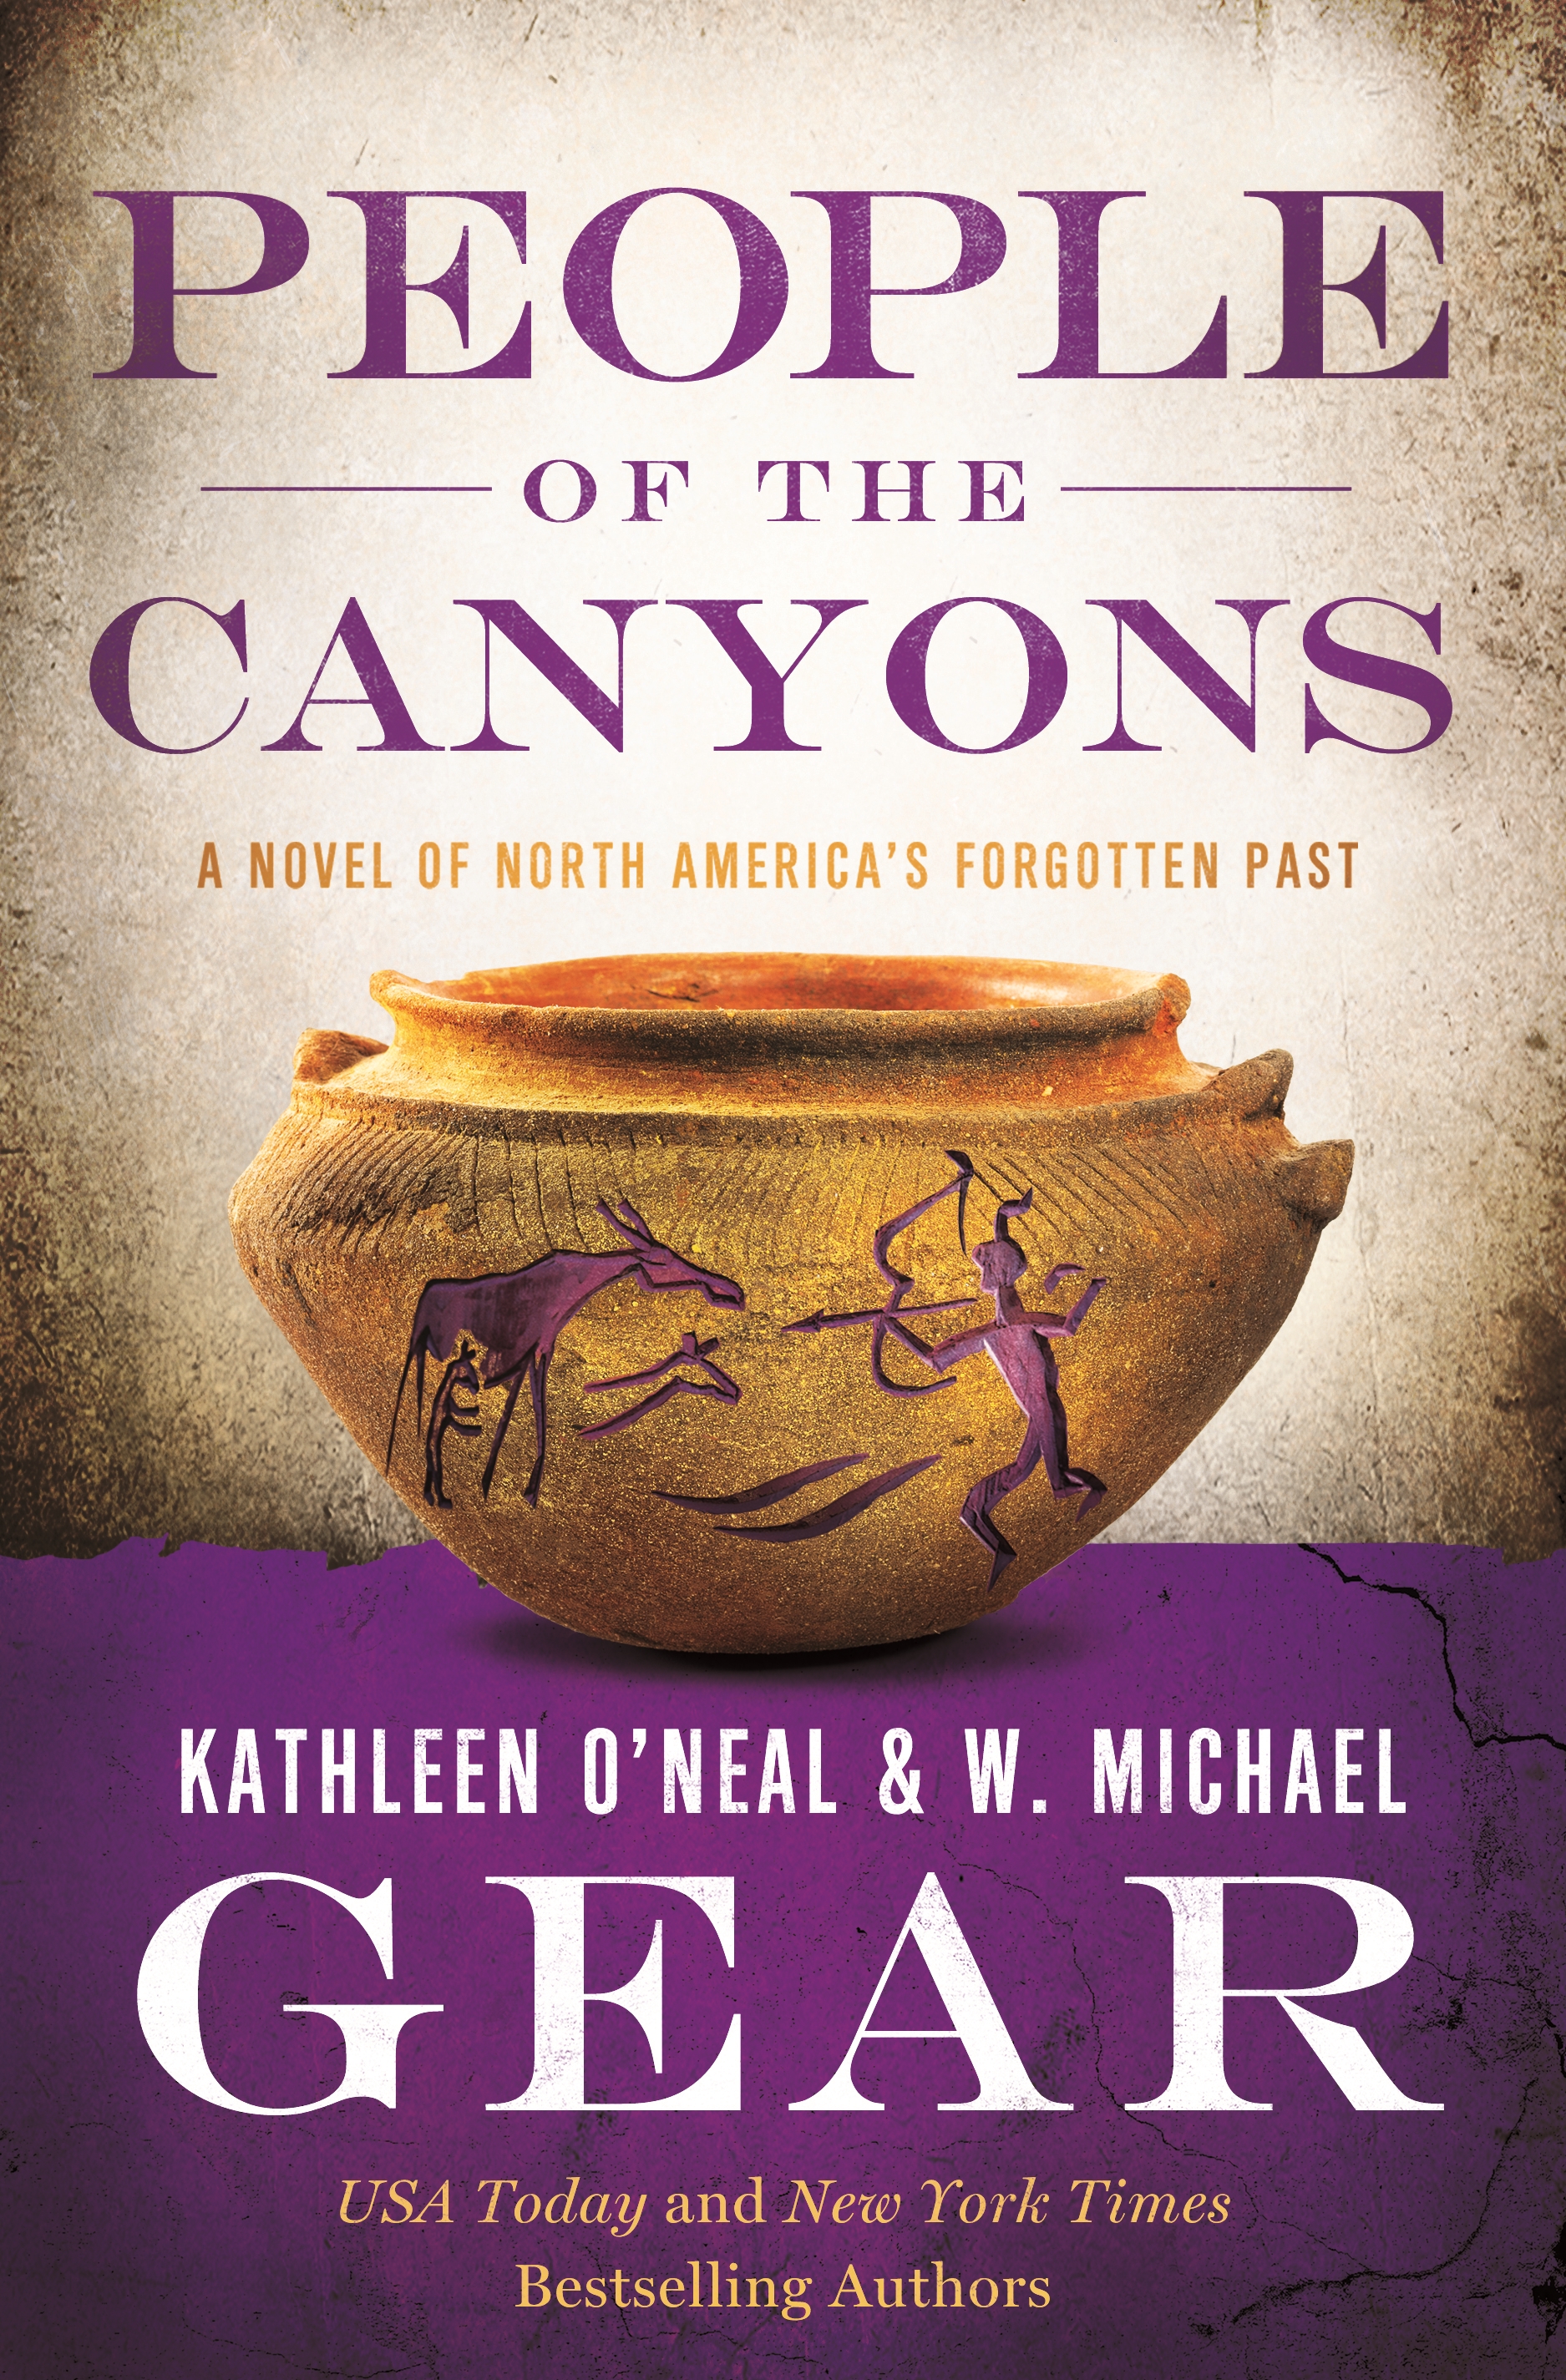 People of the Canyons : A Novel of North America's Forgotten Past by Kathleen O'Neal Gear, W. Michael Gear